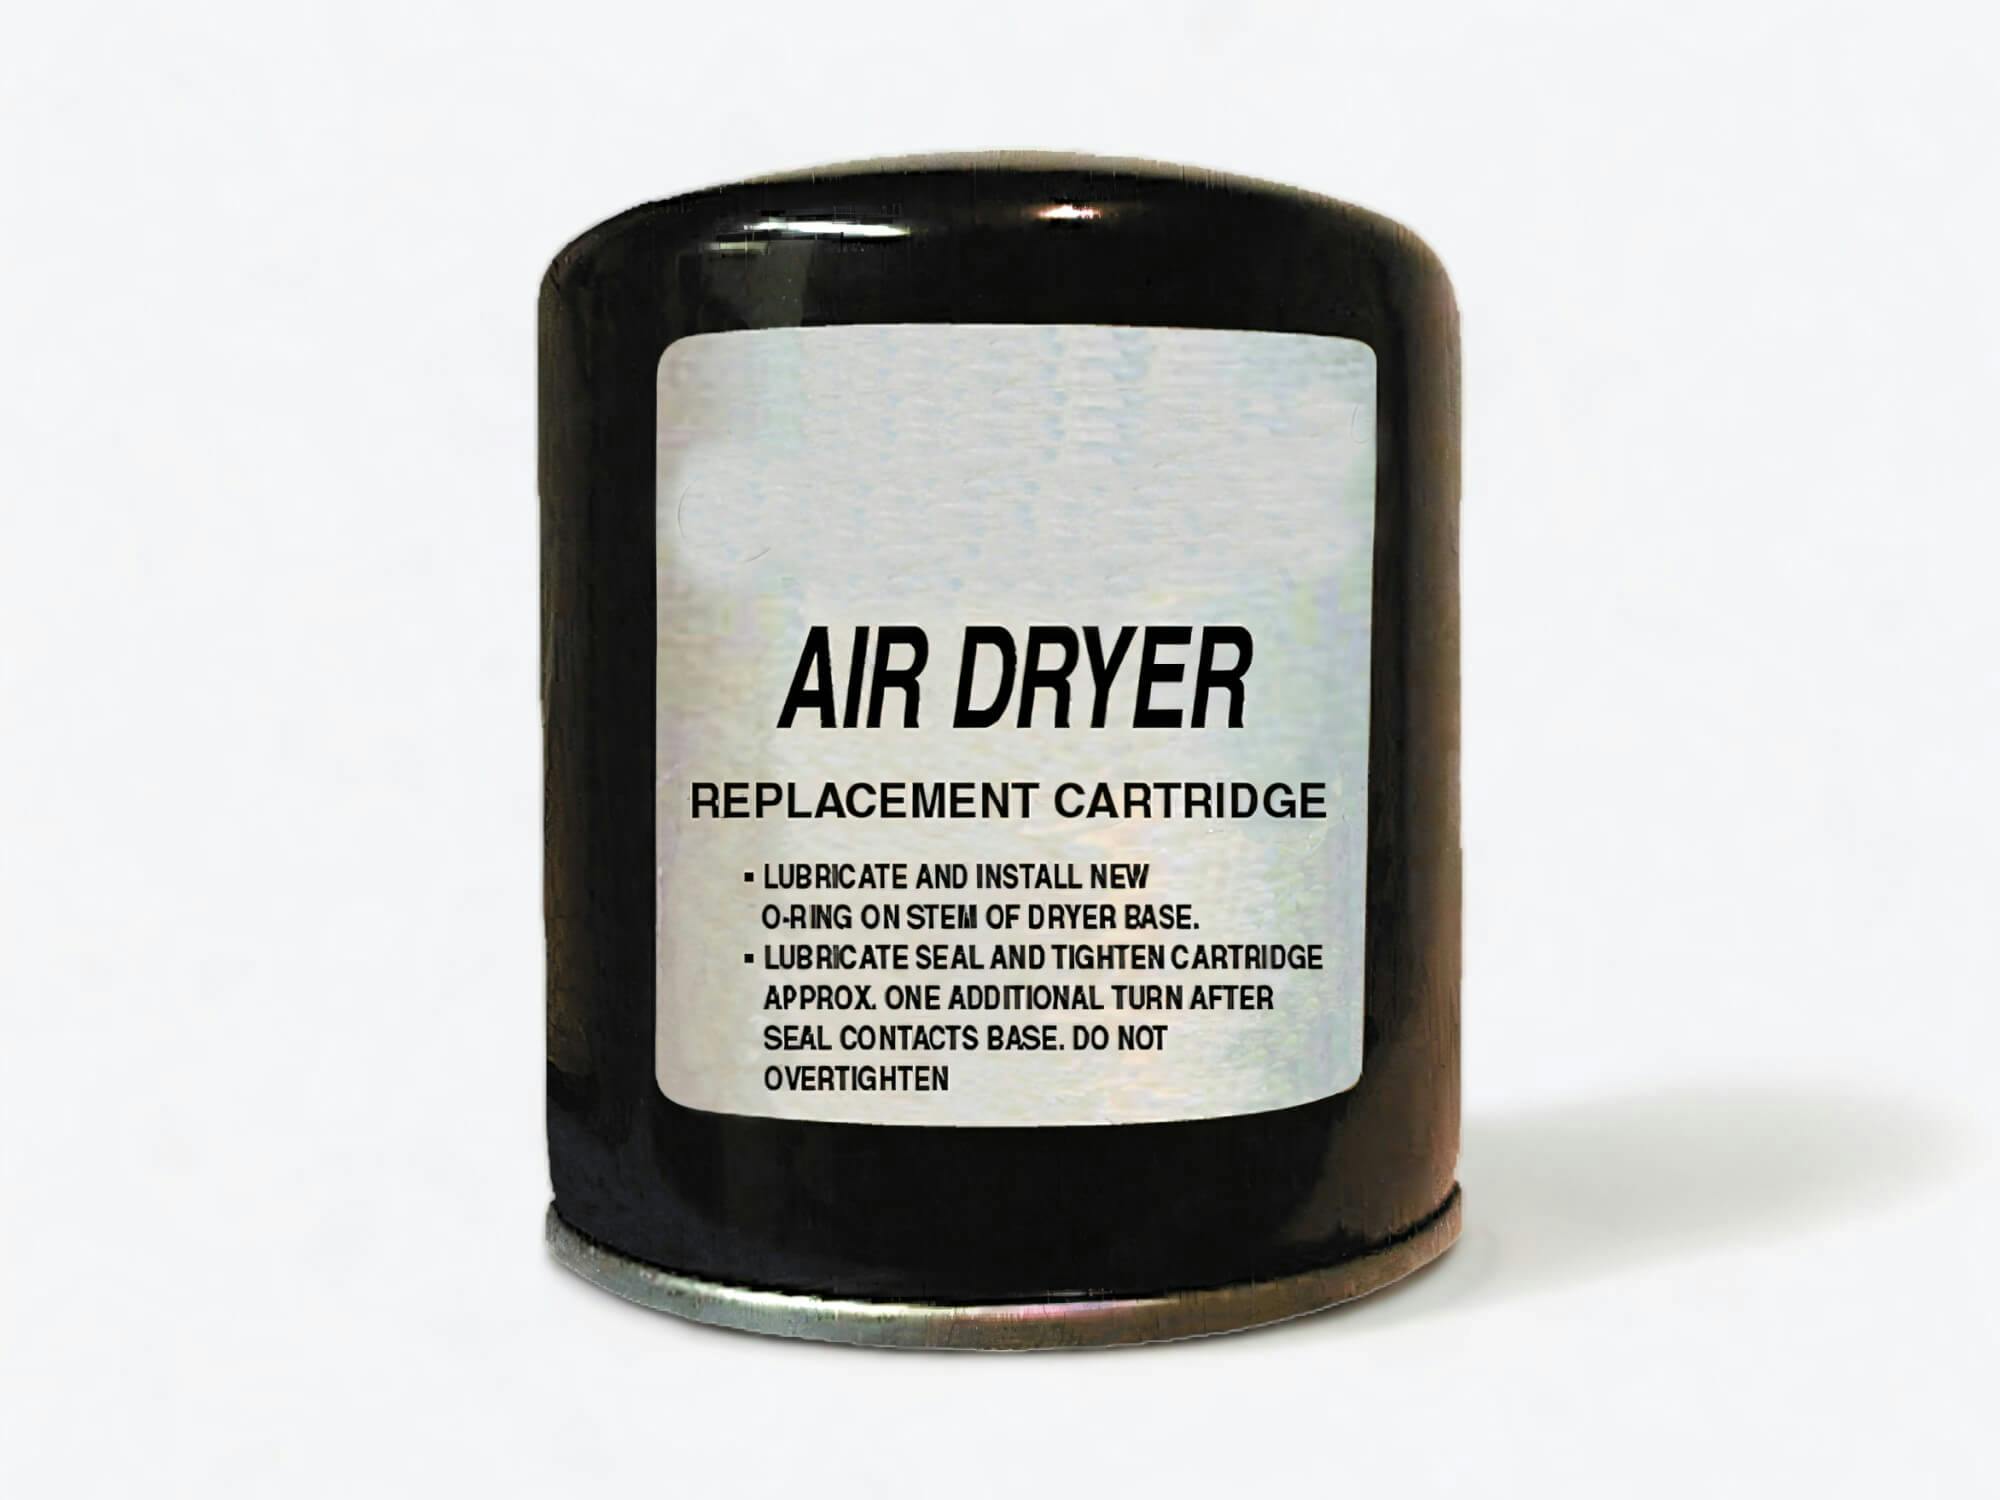 Air Dryer Cartridge (AD-SP™, AD-IS™, SS1200, SS1200P) - air-dryer-cartridge-ad-sptm-ad-istm-ss1200-ss1200p-rf900019206_001